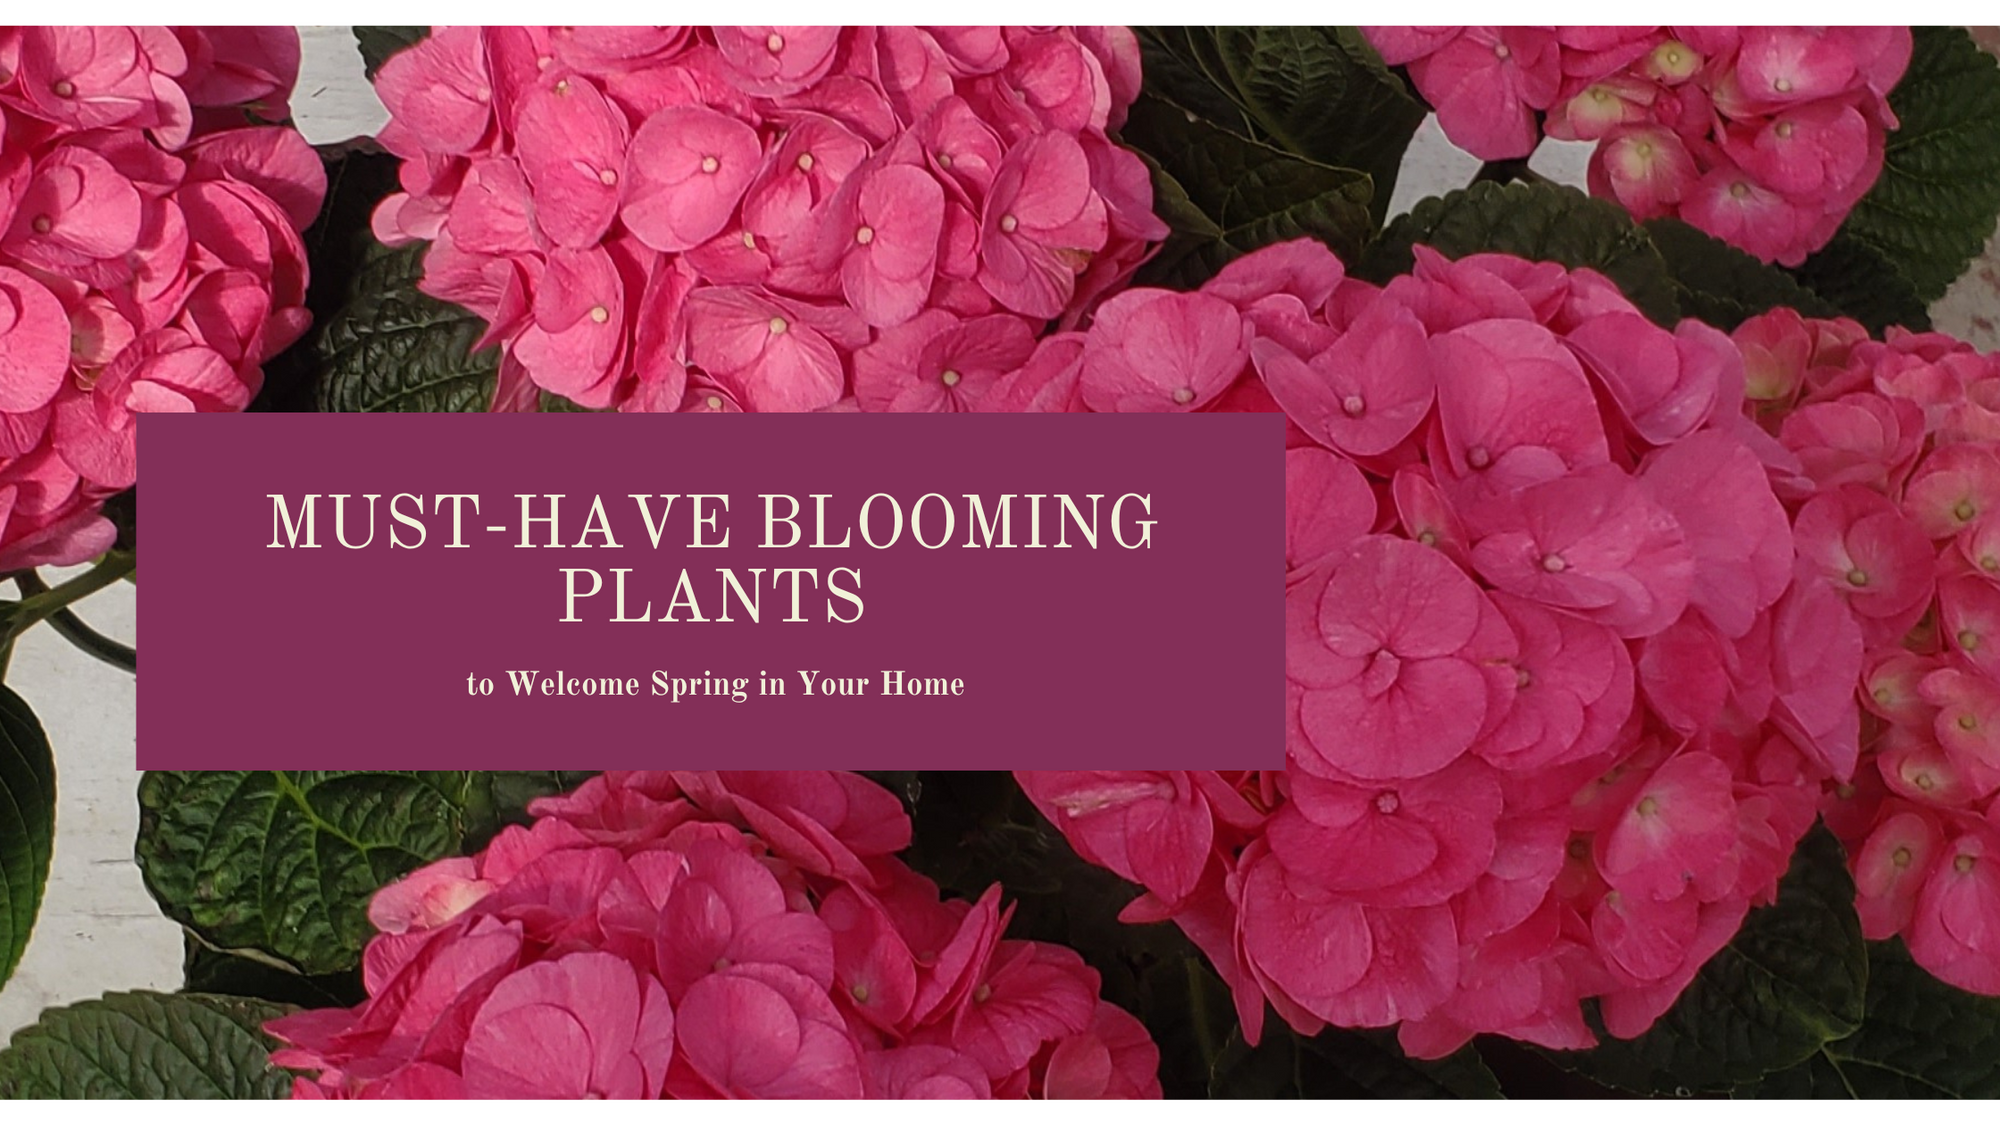 Must-Have Blooming Plants to Welcome Spring in Your Home